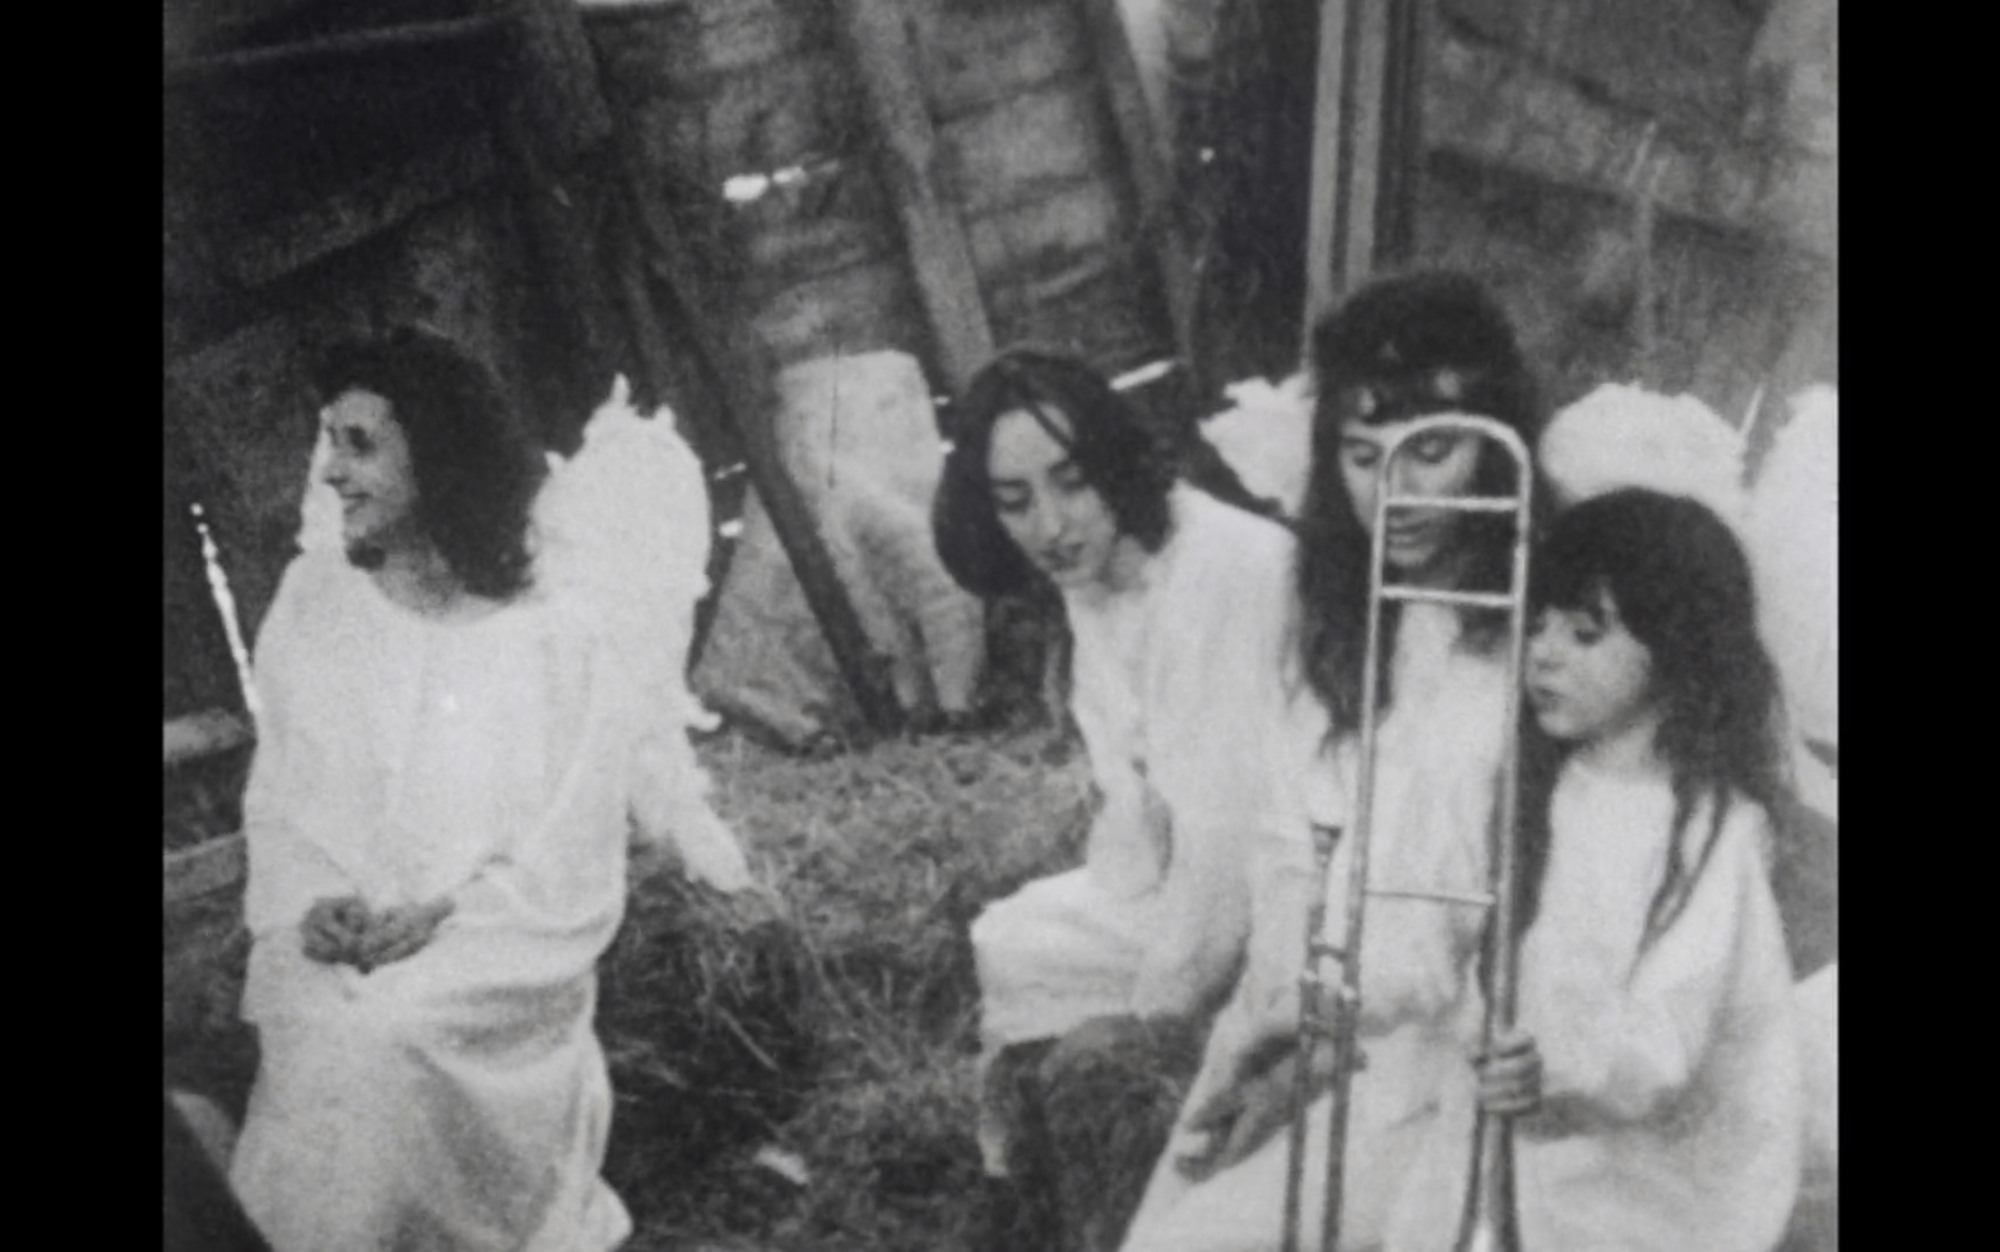 Screenshot from film Lost,Lost,Lost displaying 3 women dressed in white sitting